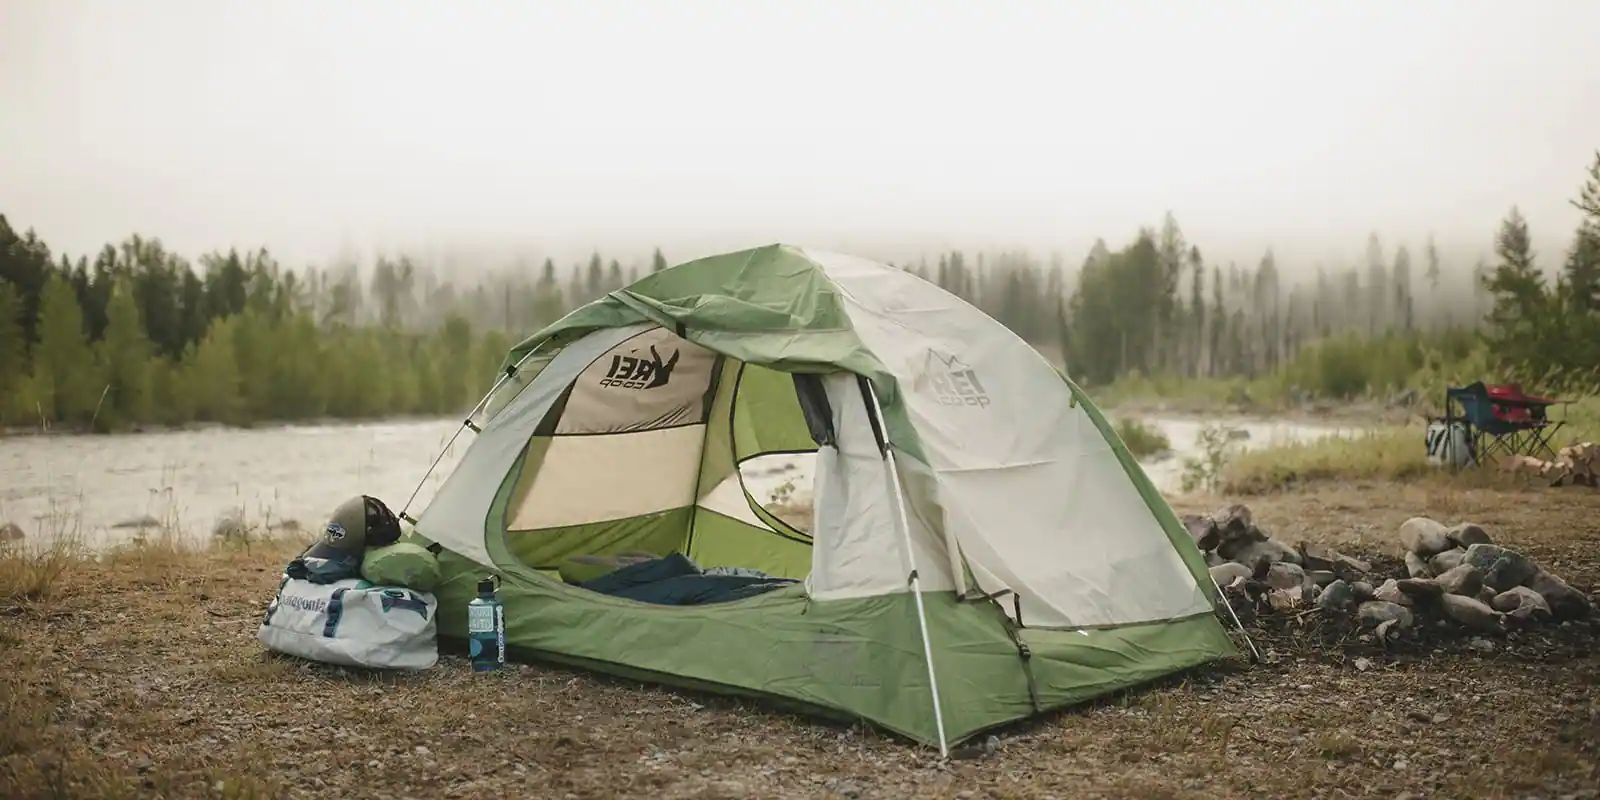 How big is a 3 person tent